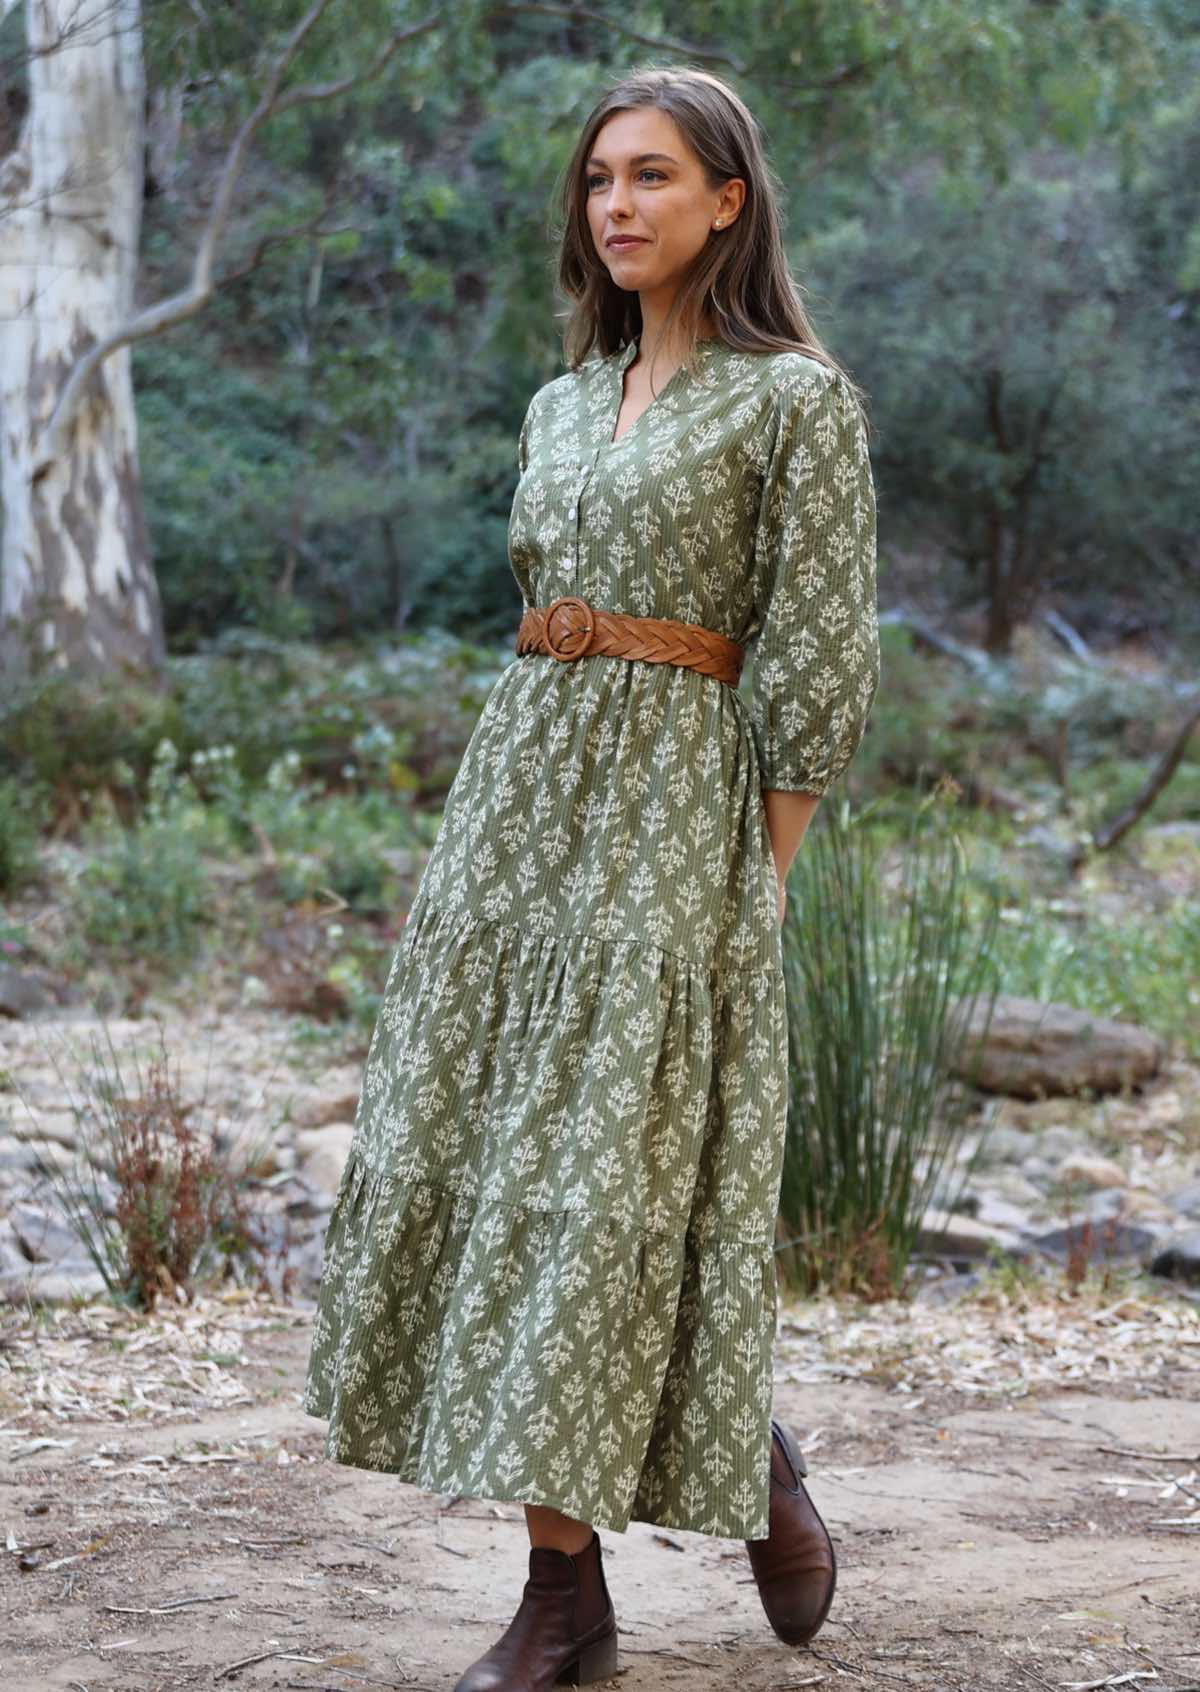 Boho cotton maxi dress looks great belted